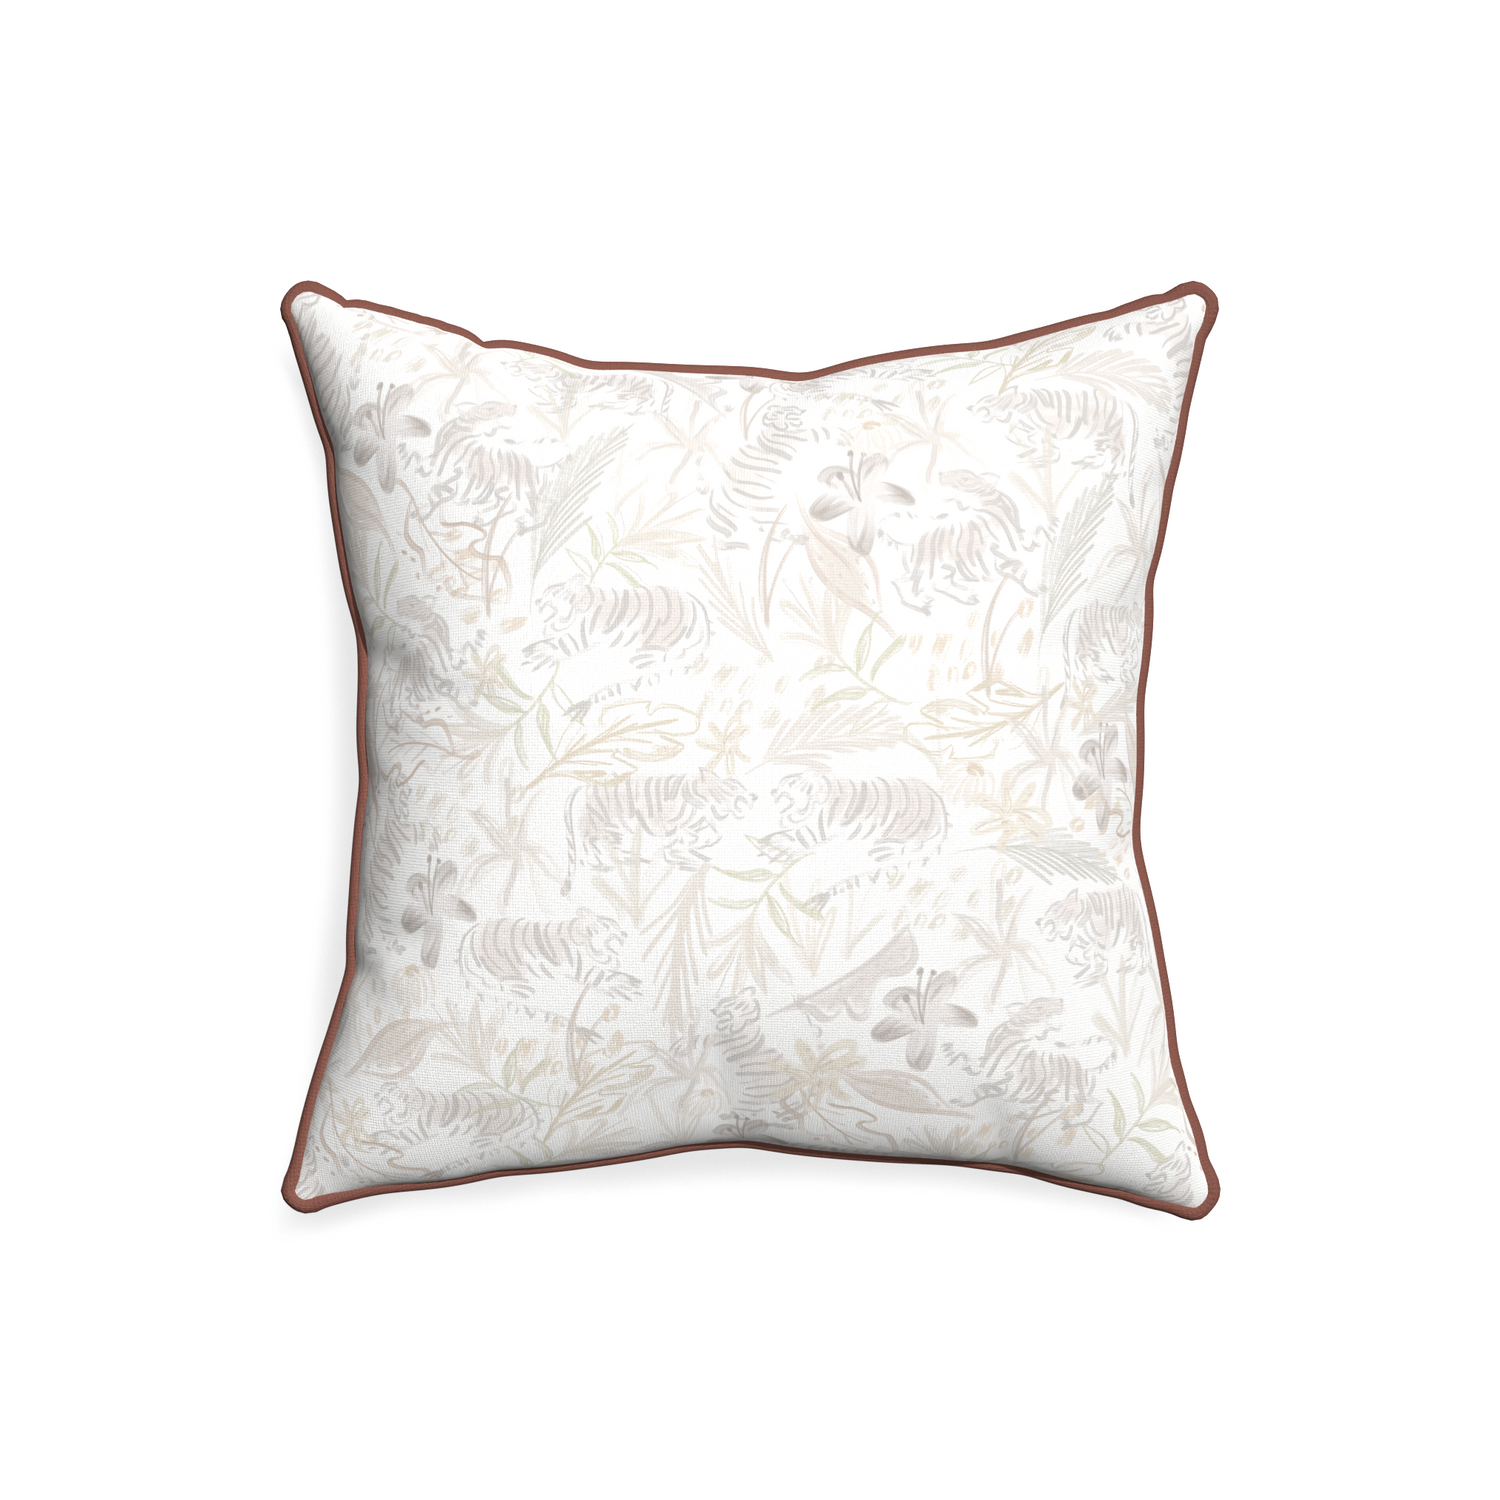 20-square frida sand custom pillow with w piping on white background